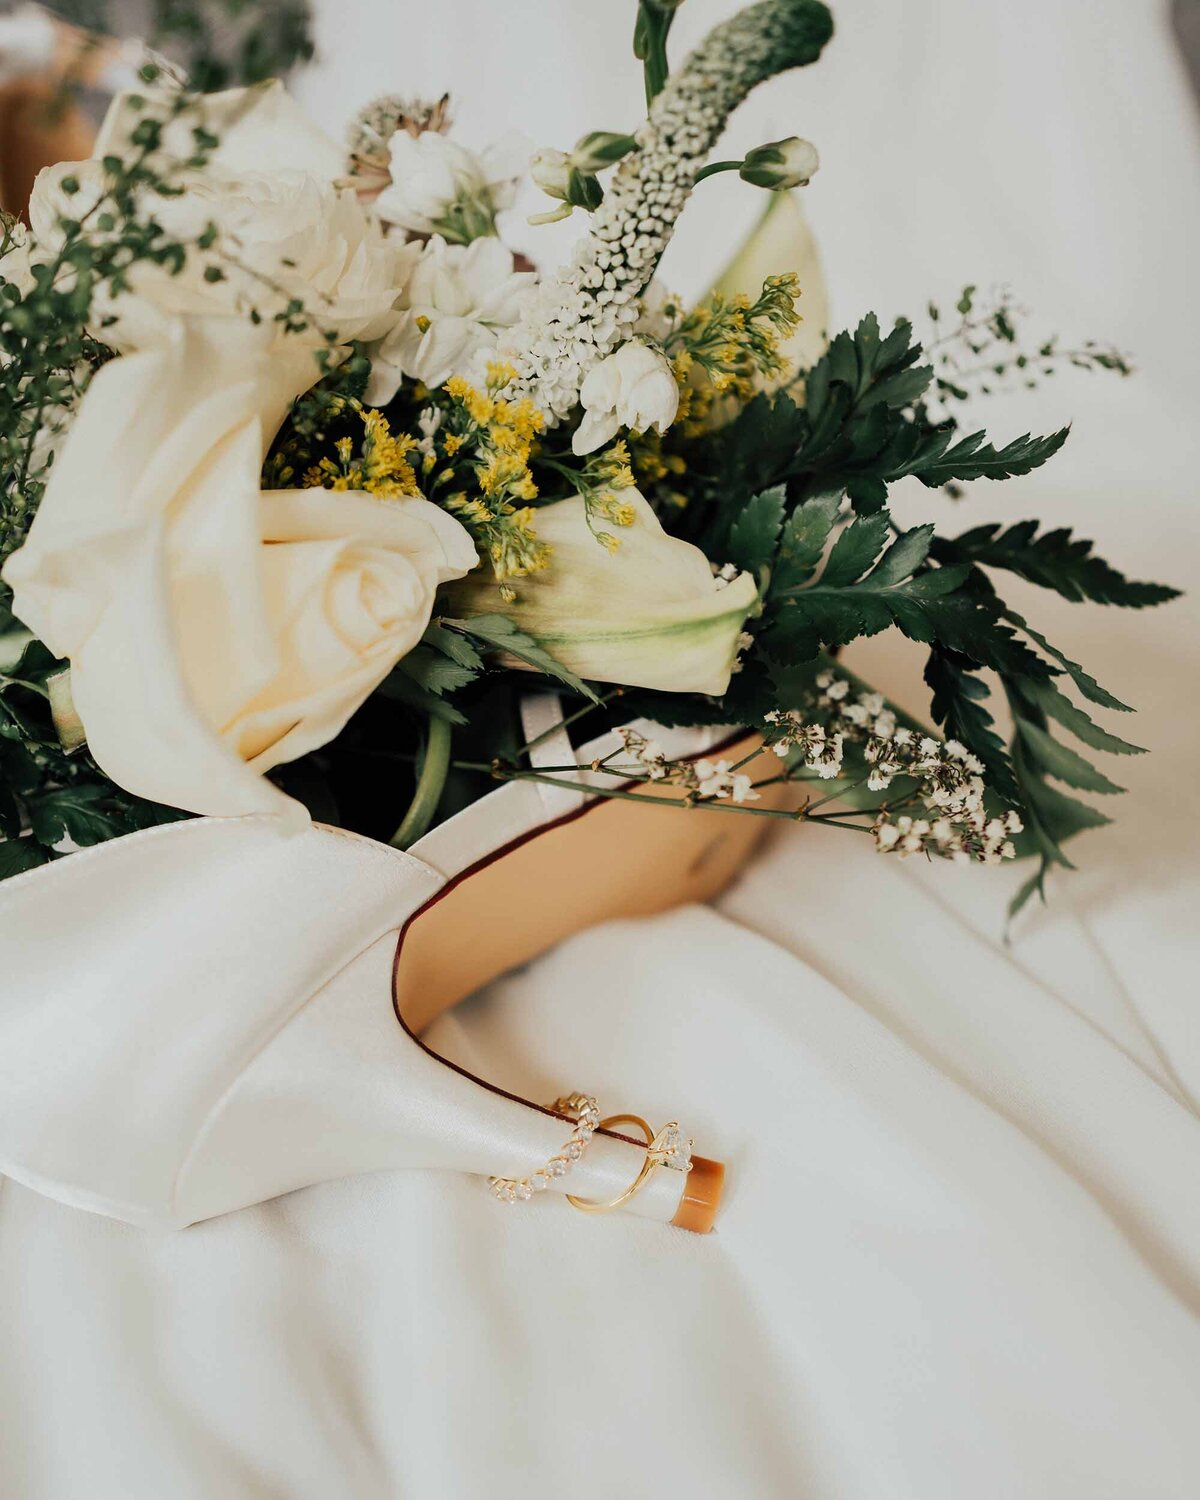 Maddie Rae Photography detail shot of the brides flowers, rings, and shoe. the rings are on the heel of the shoe